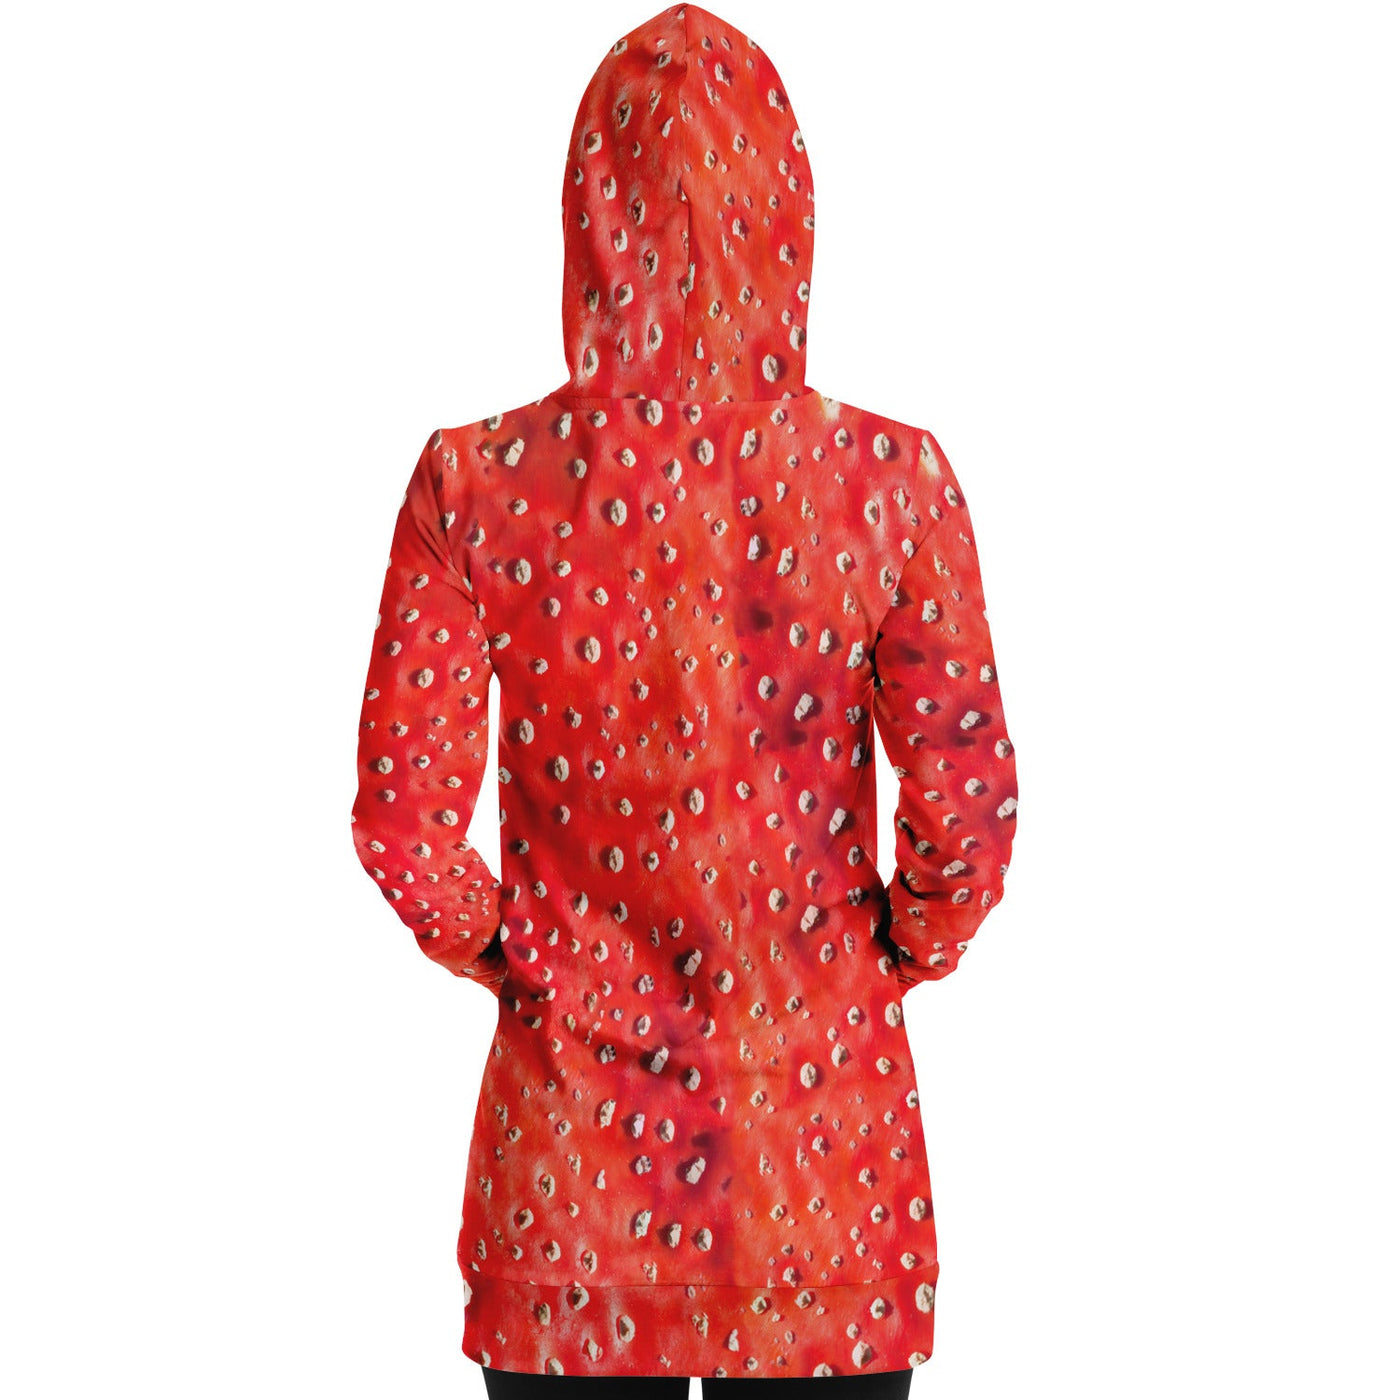 Fly Agaric all-over | Hippie Raver Long Hoodie Dress